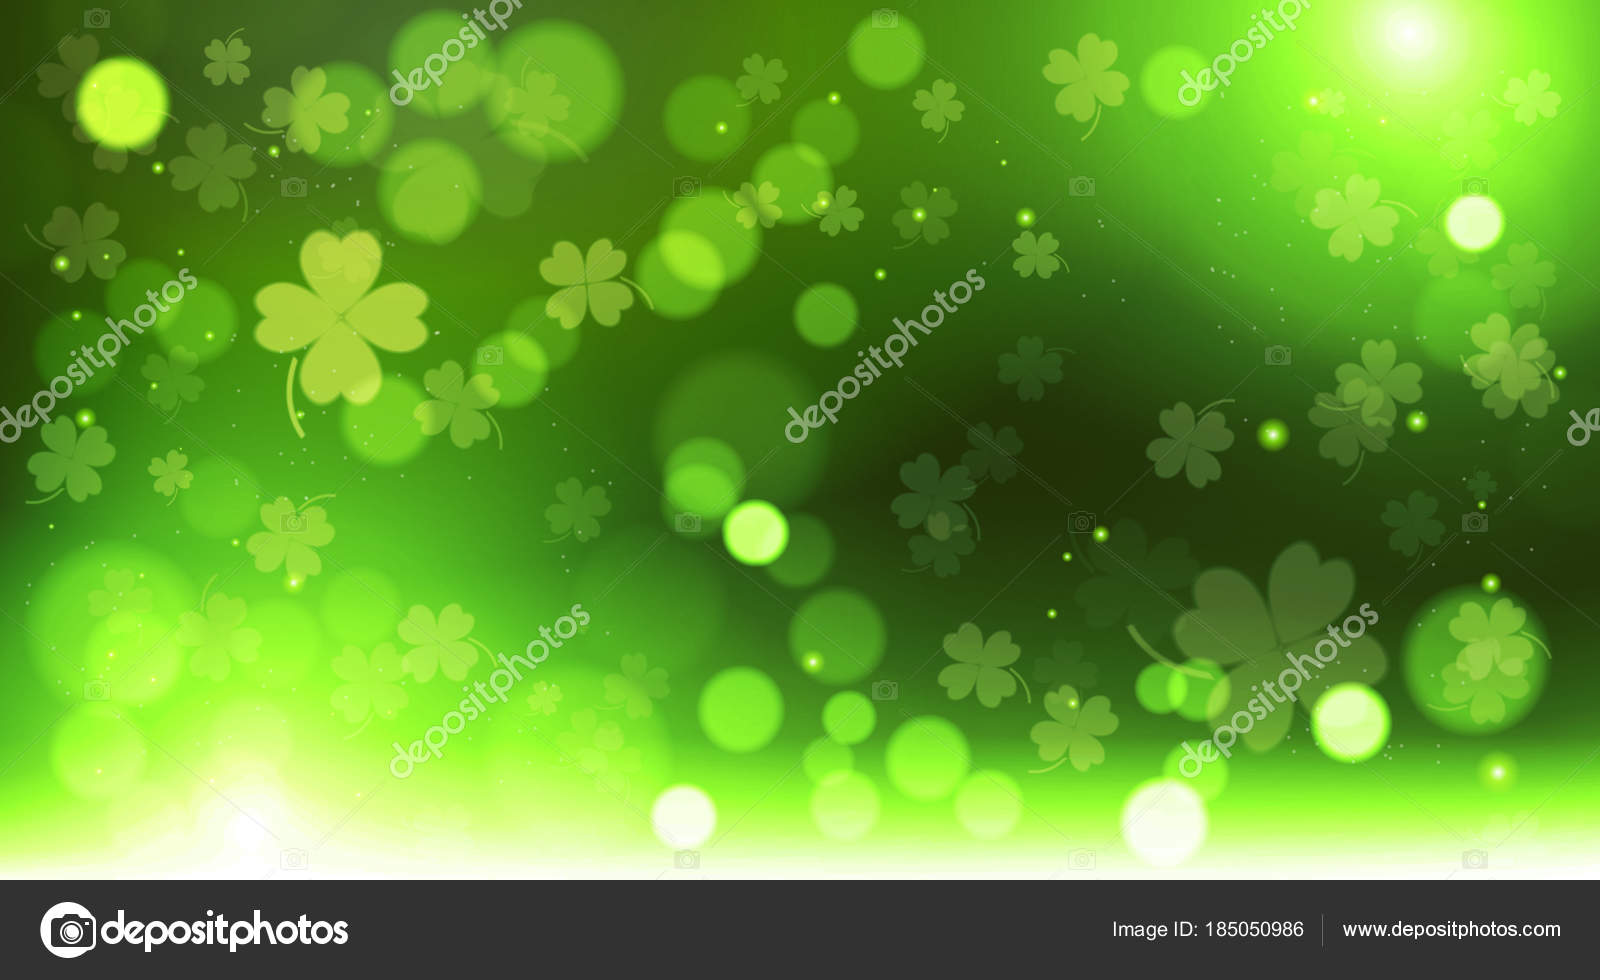 Happy St. Patrick's Day - Other & Abstract Background Wallpapers